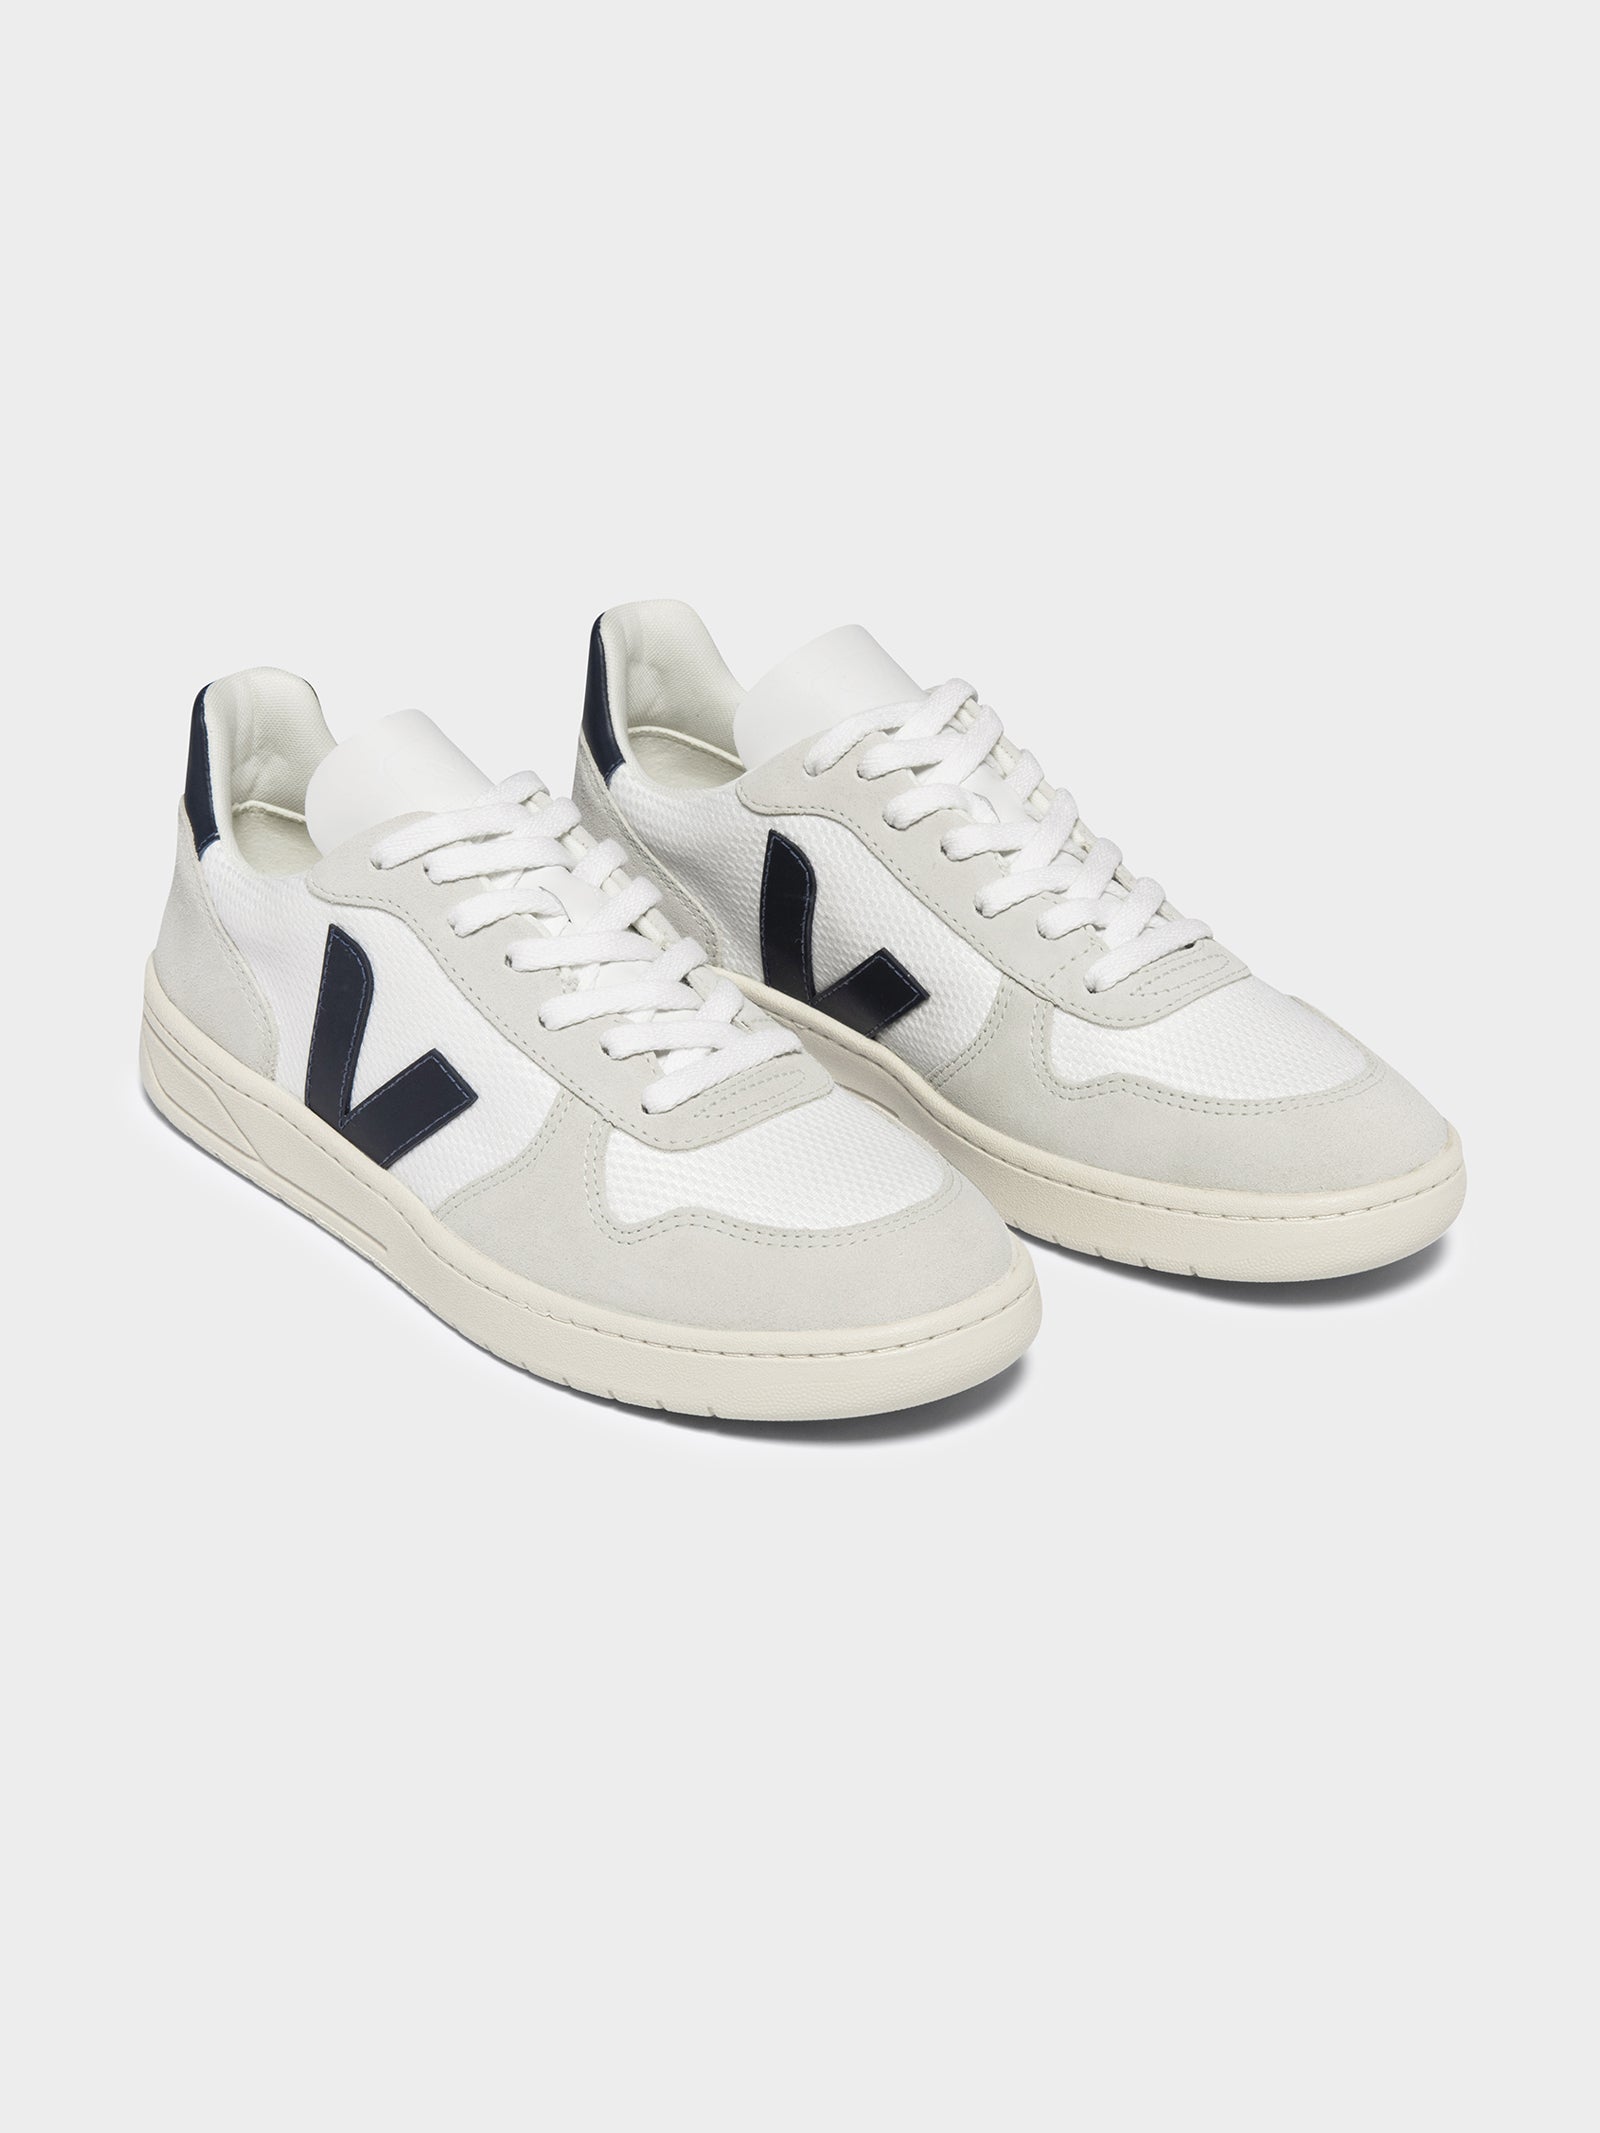 Mens V10 Leather Suede Sneakers in White & Navy